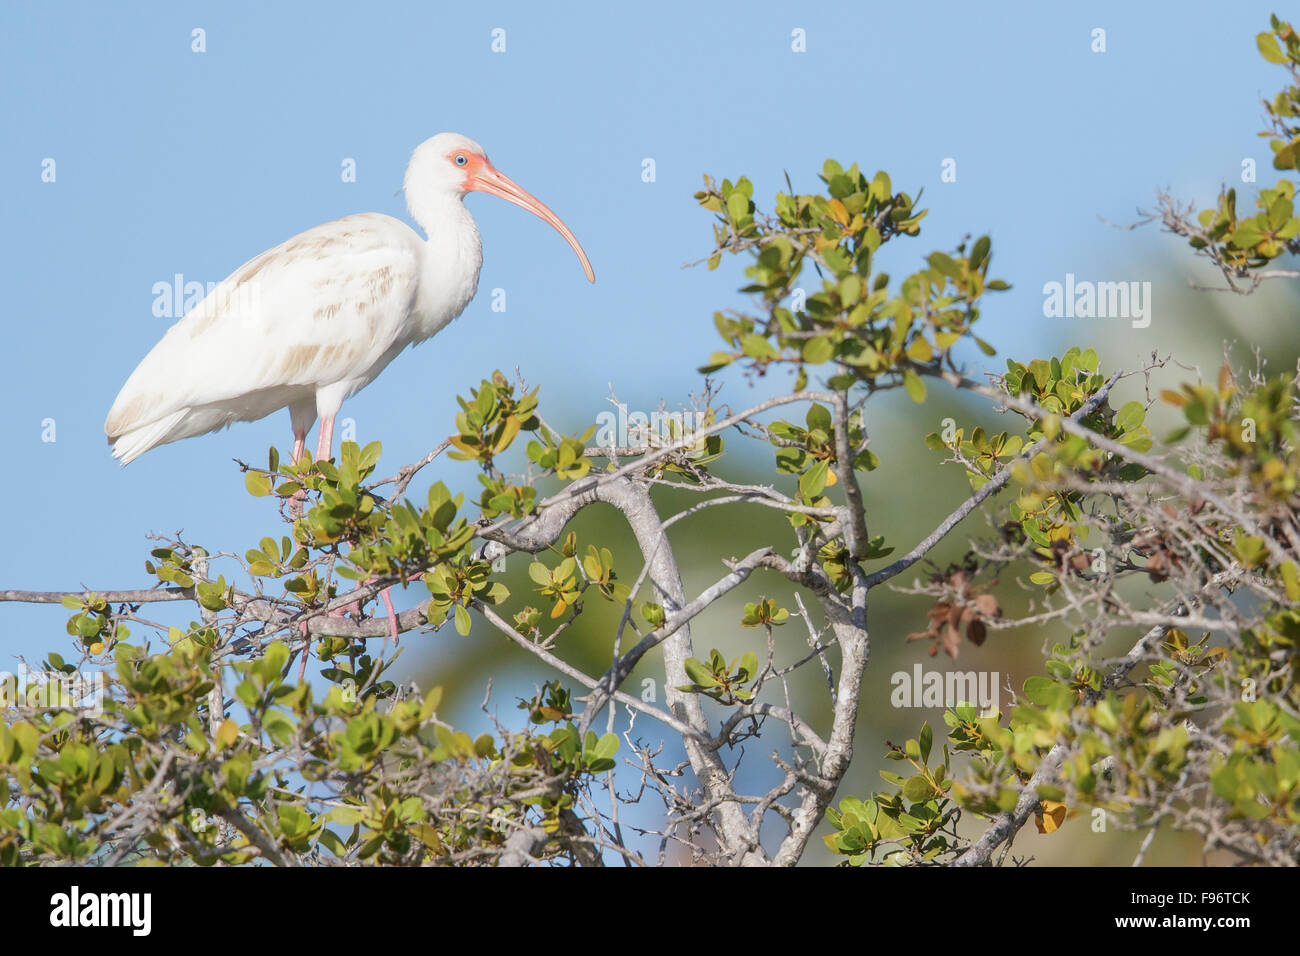 White Ibis (Eudocimus albus) perched on a branch in Cuba. Stock Photo